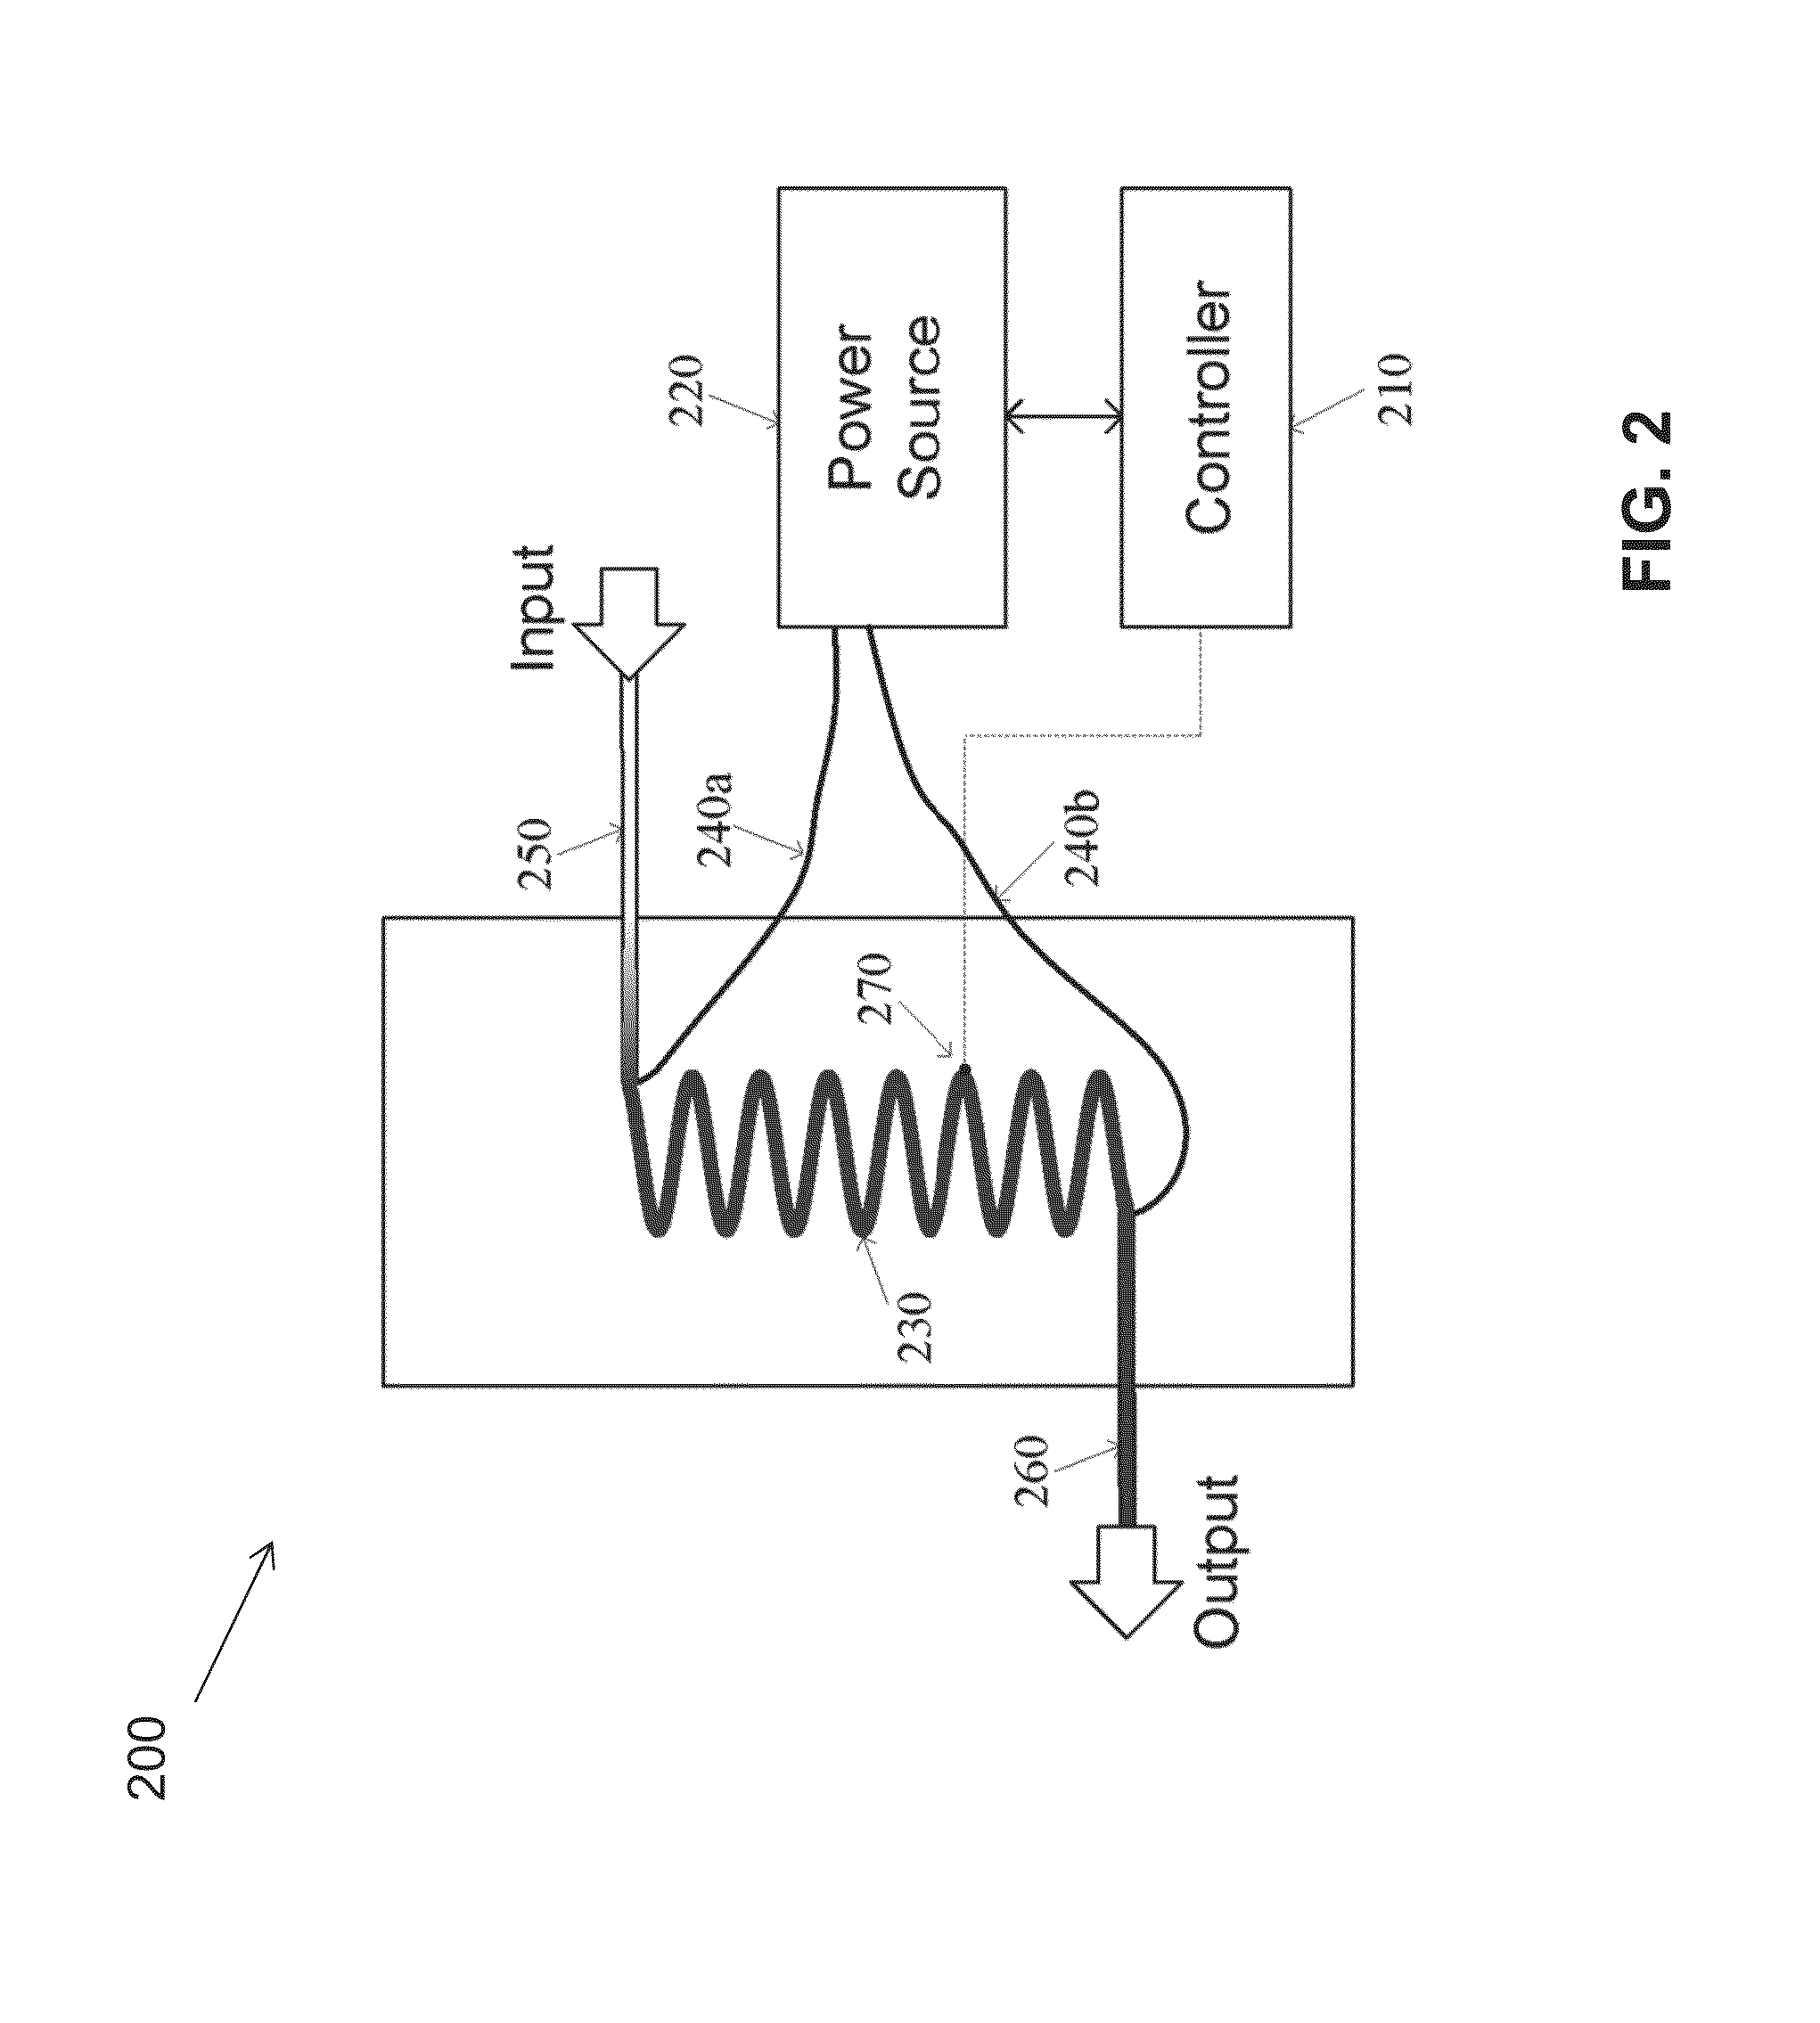 Method and Apparatus for a Directly Electrically Heated Flow-Through Chemical Reactor